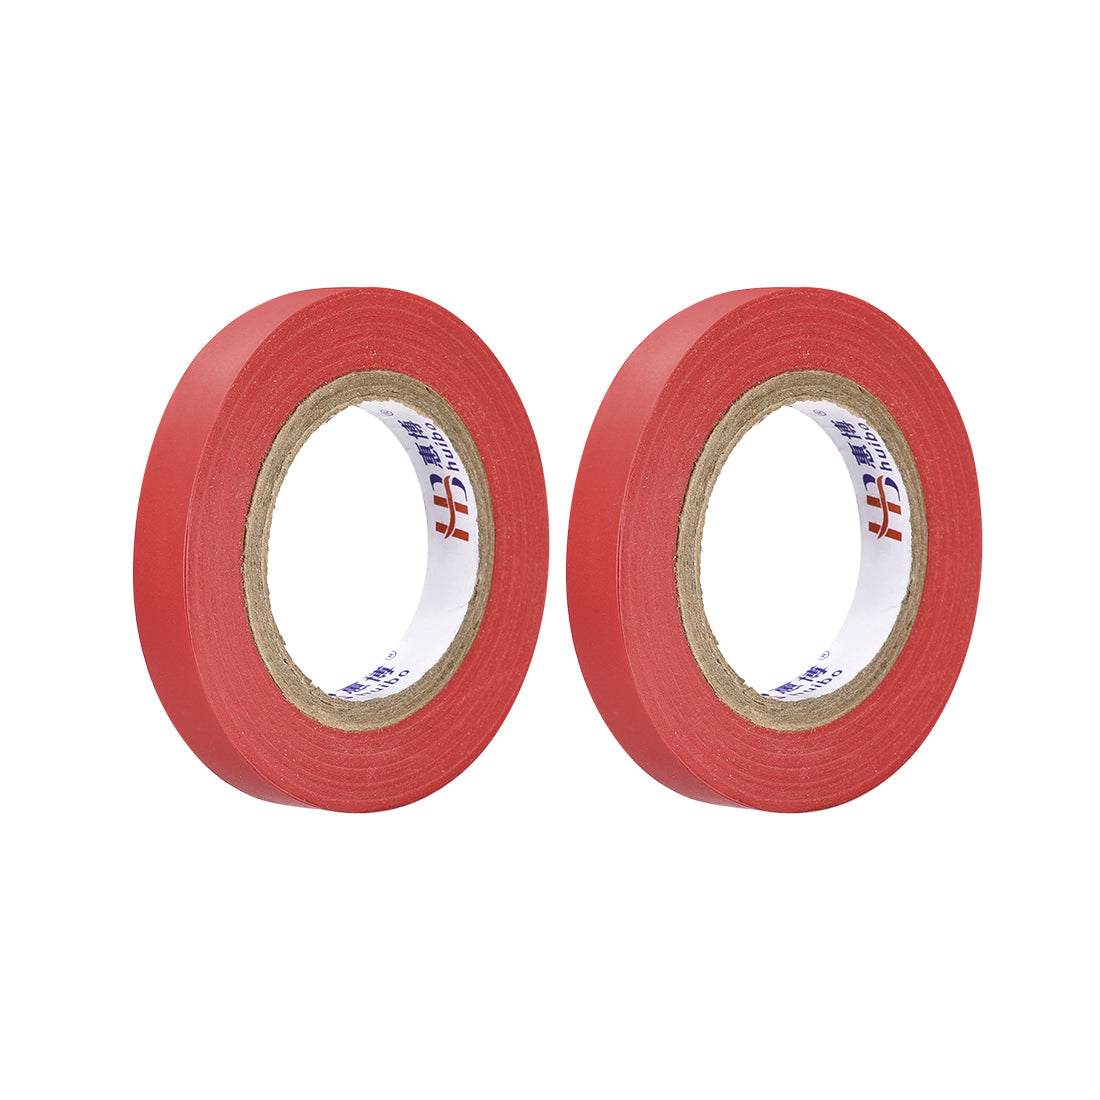 uxcell Uxcell Insulating Tape 10mm Width 14.5M Long 0.15mm Thick PVC Electrical Tape Rated for Max. 400V  80C Use Red 2pcs